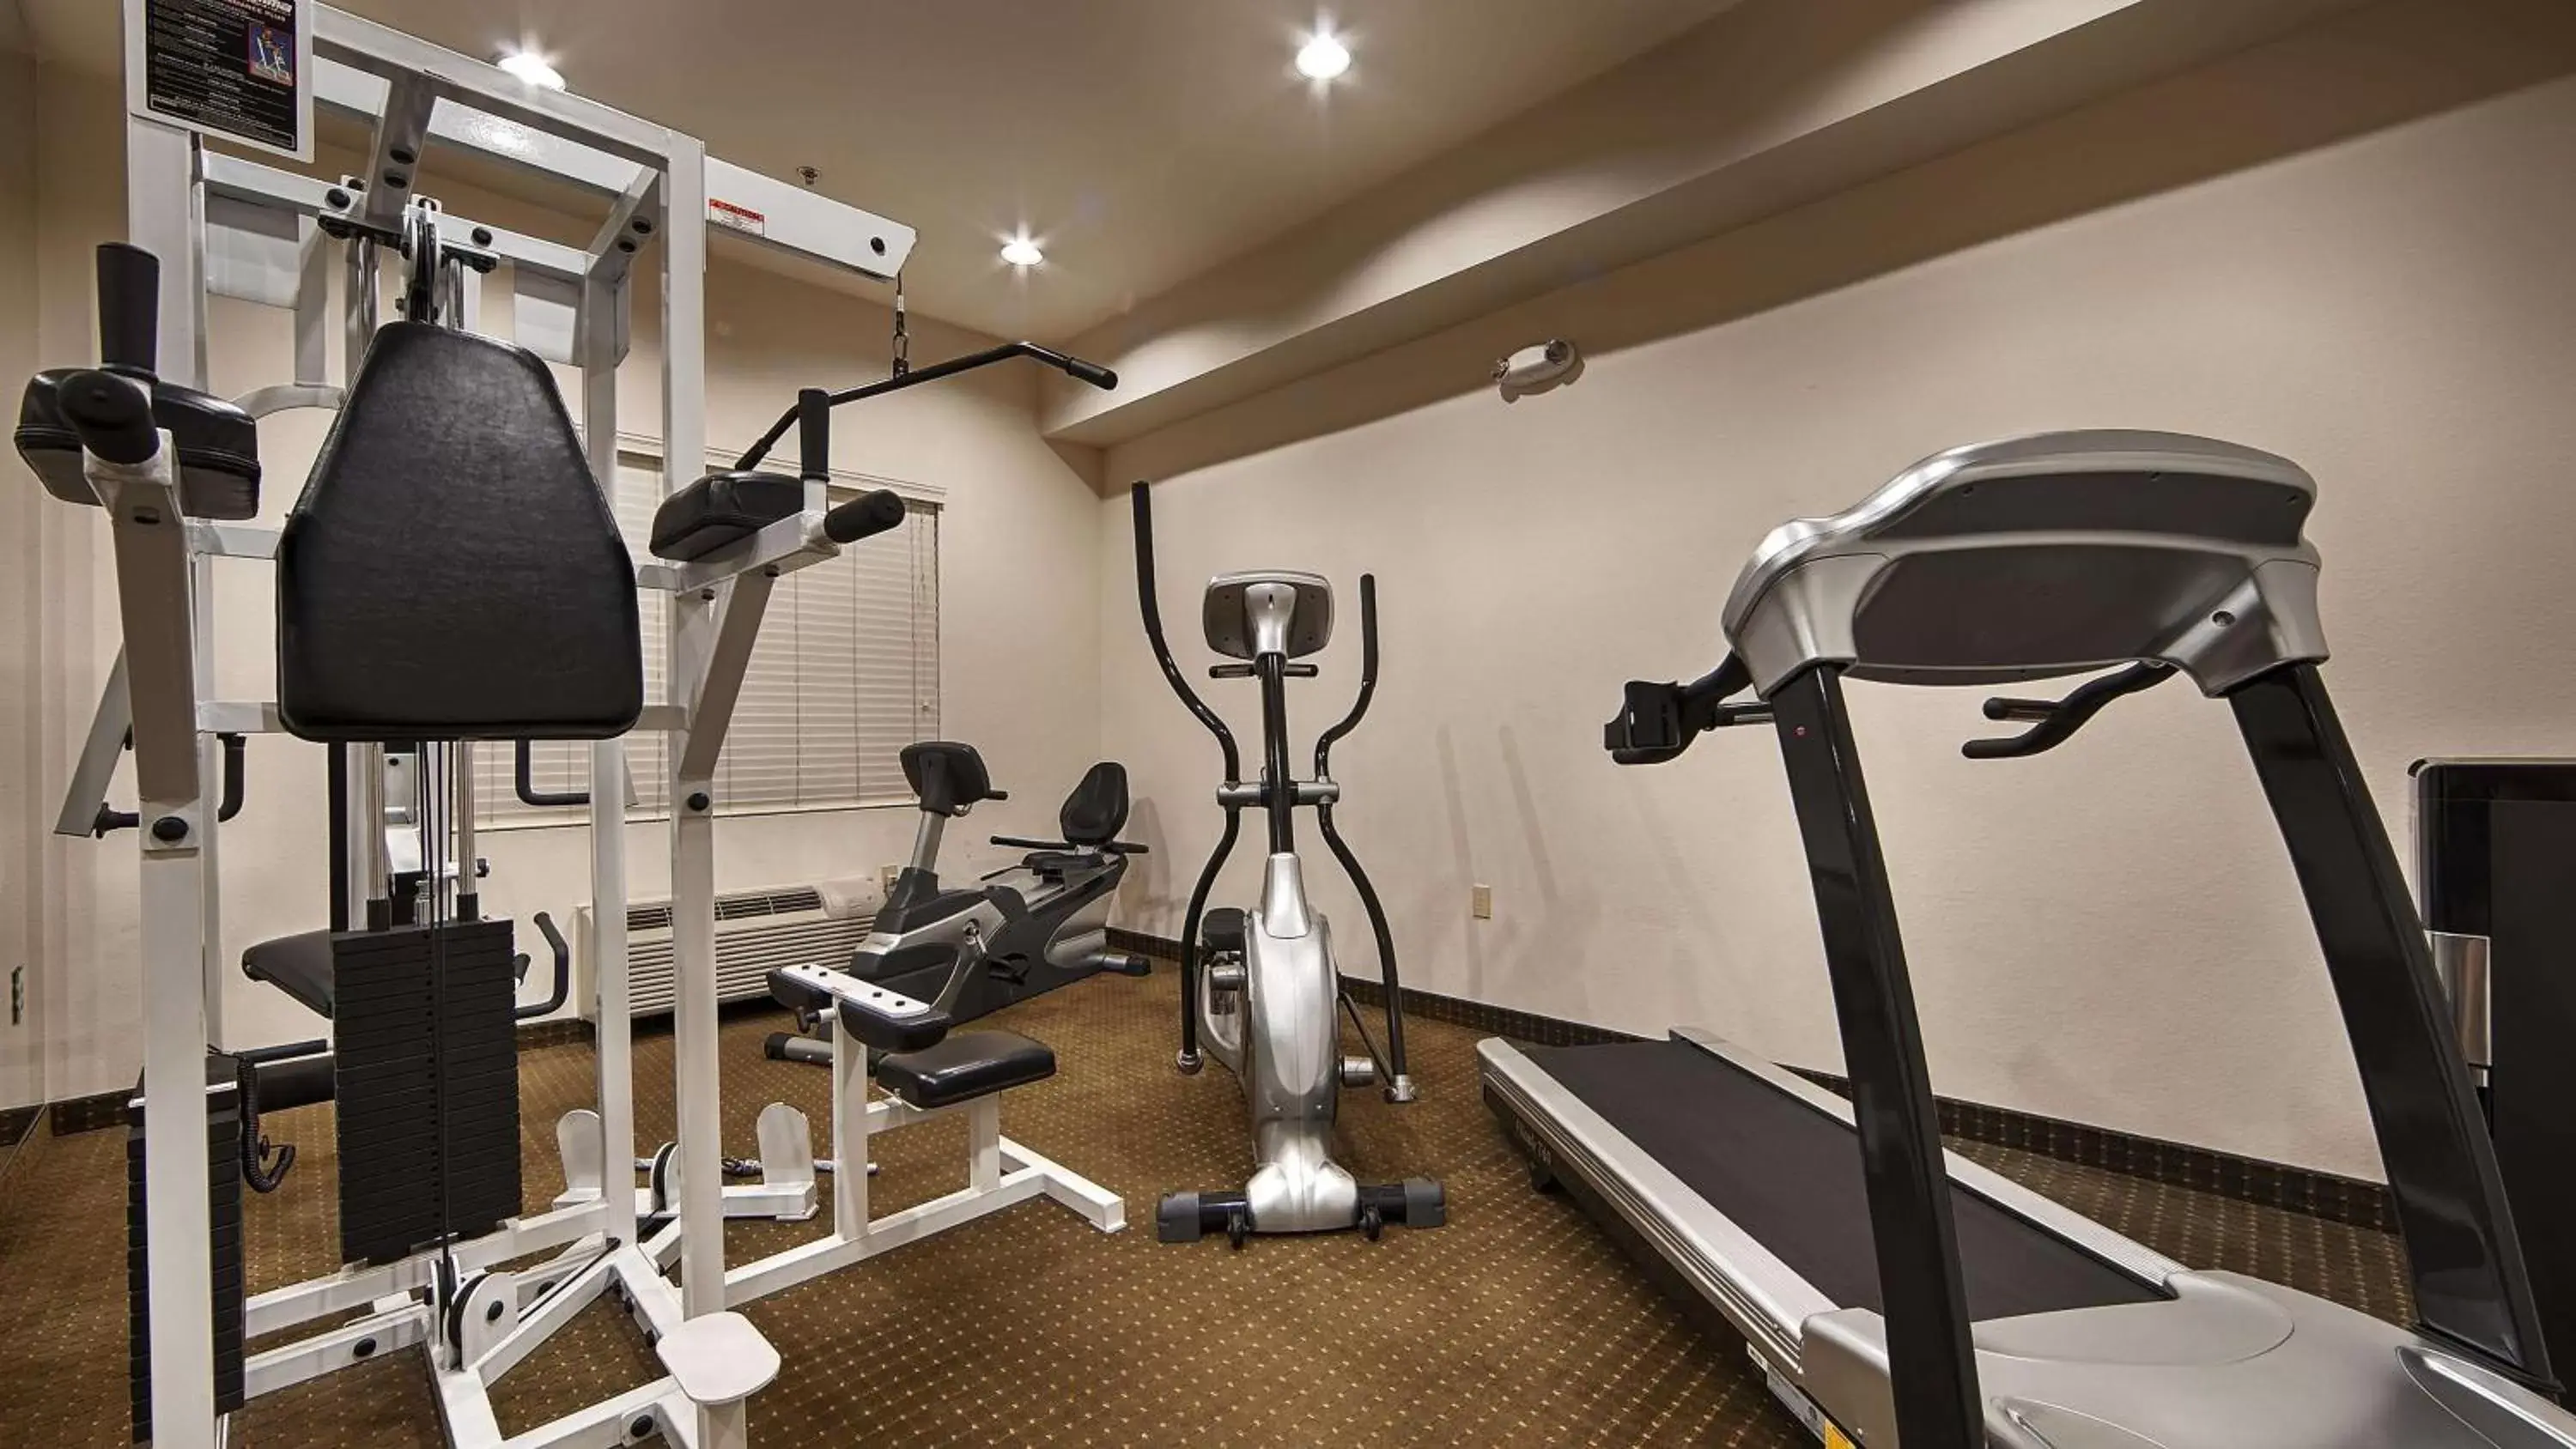 Fitness centre/facilities, Fitness Center/Facilities in Best Western Plus Lake Elsinore Inn & Suites